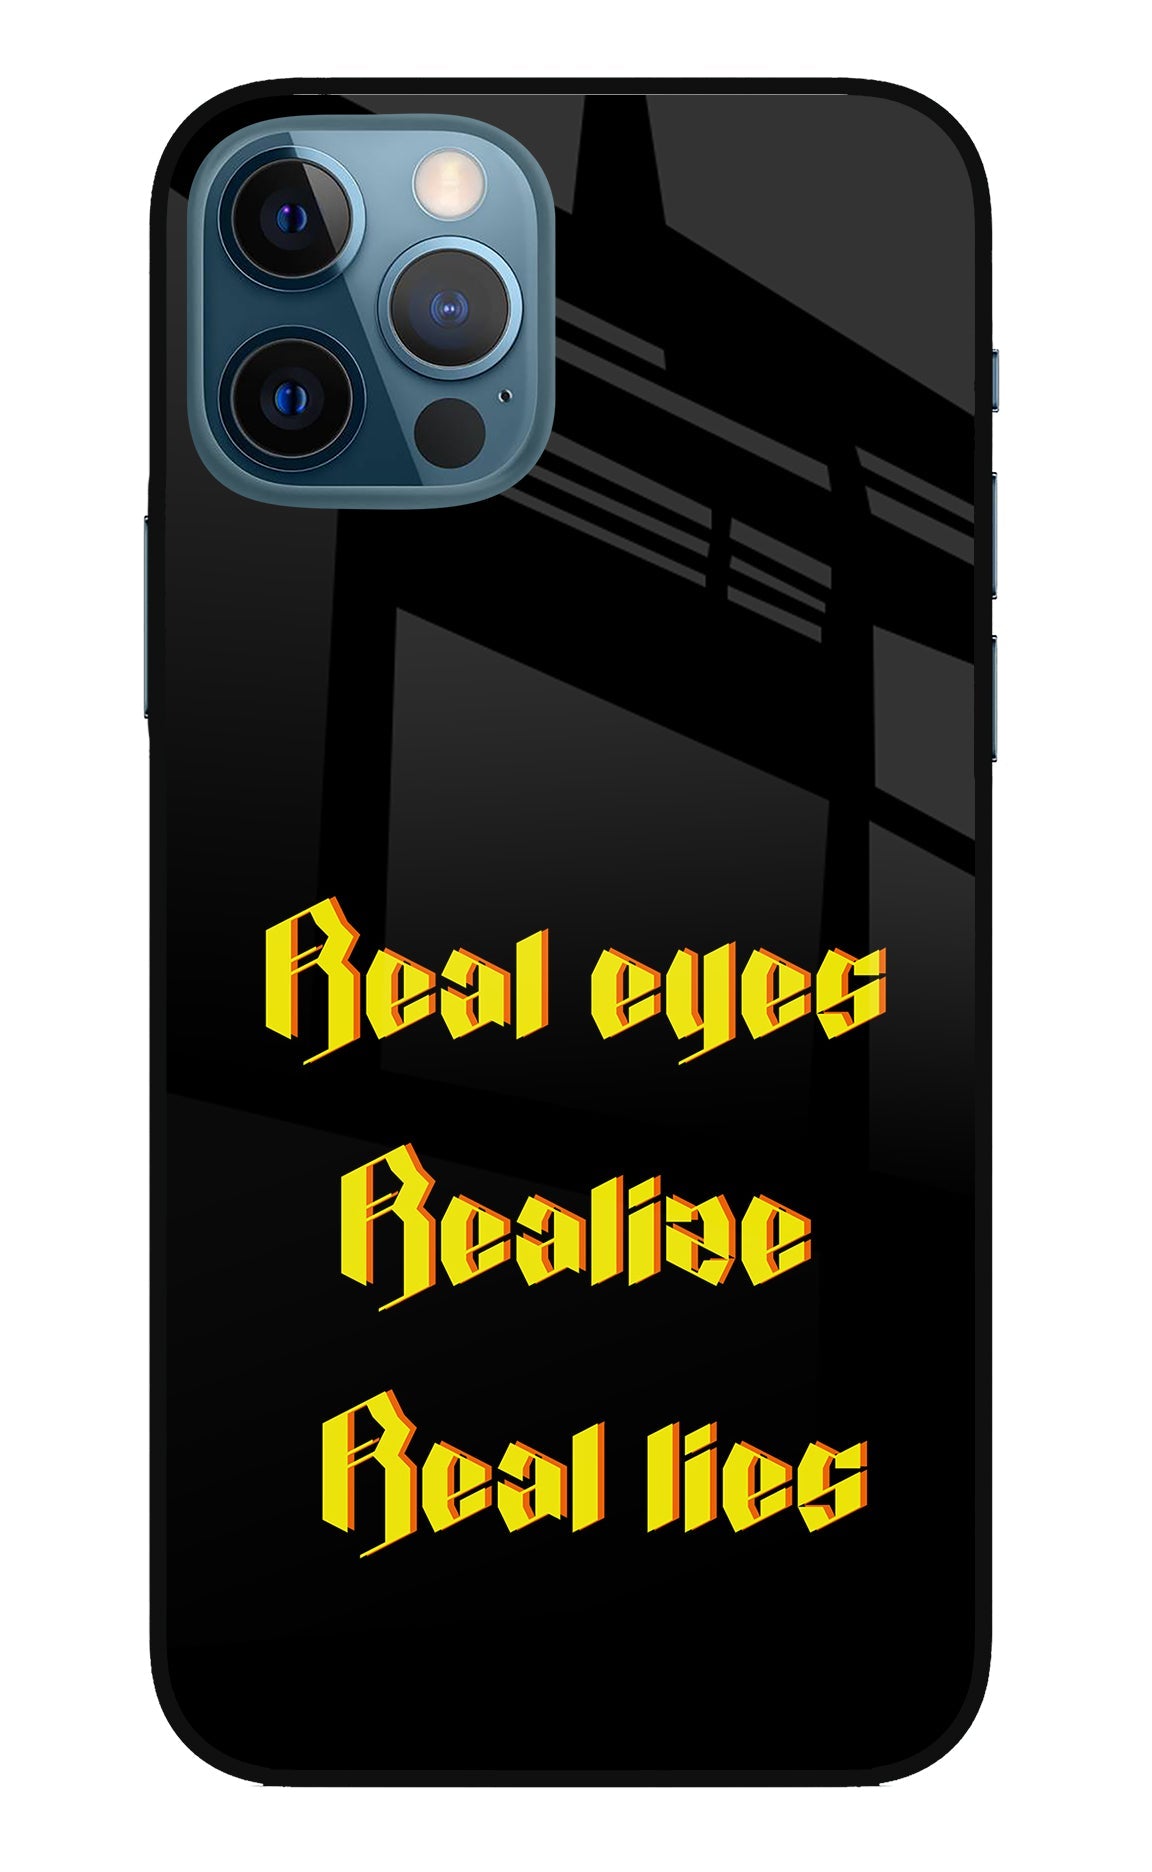 Real Eyes Realize Real Lies iPhone 12 Pro Glass Case